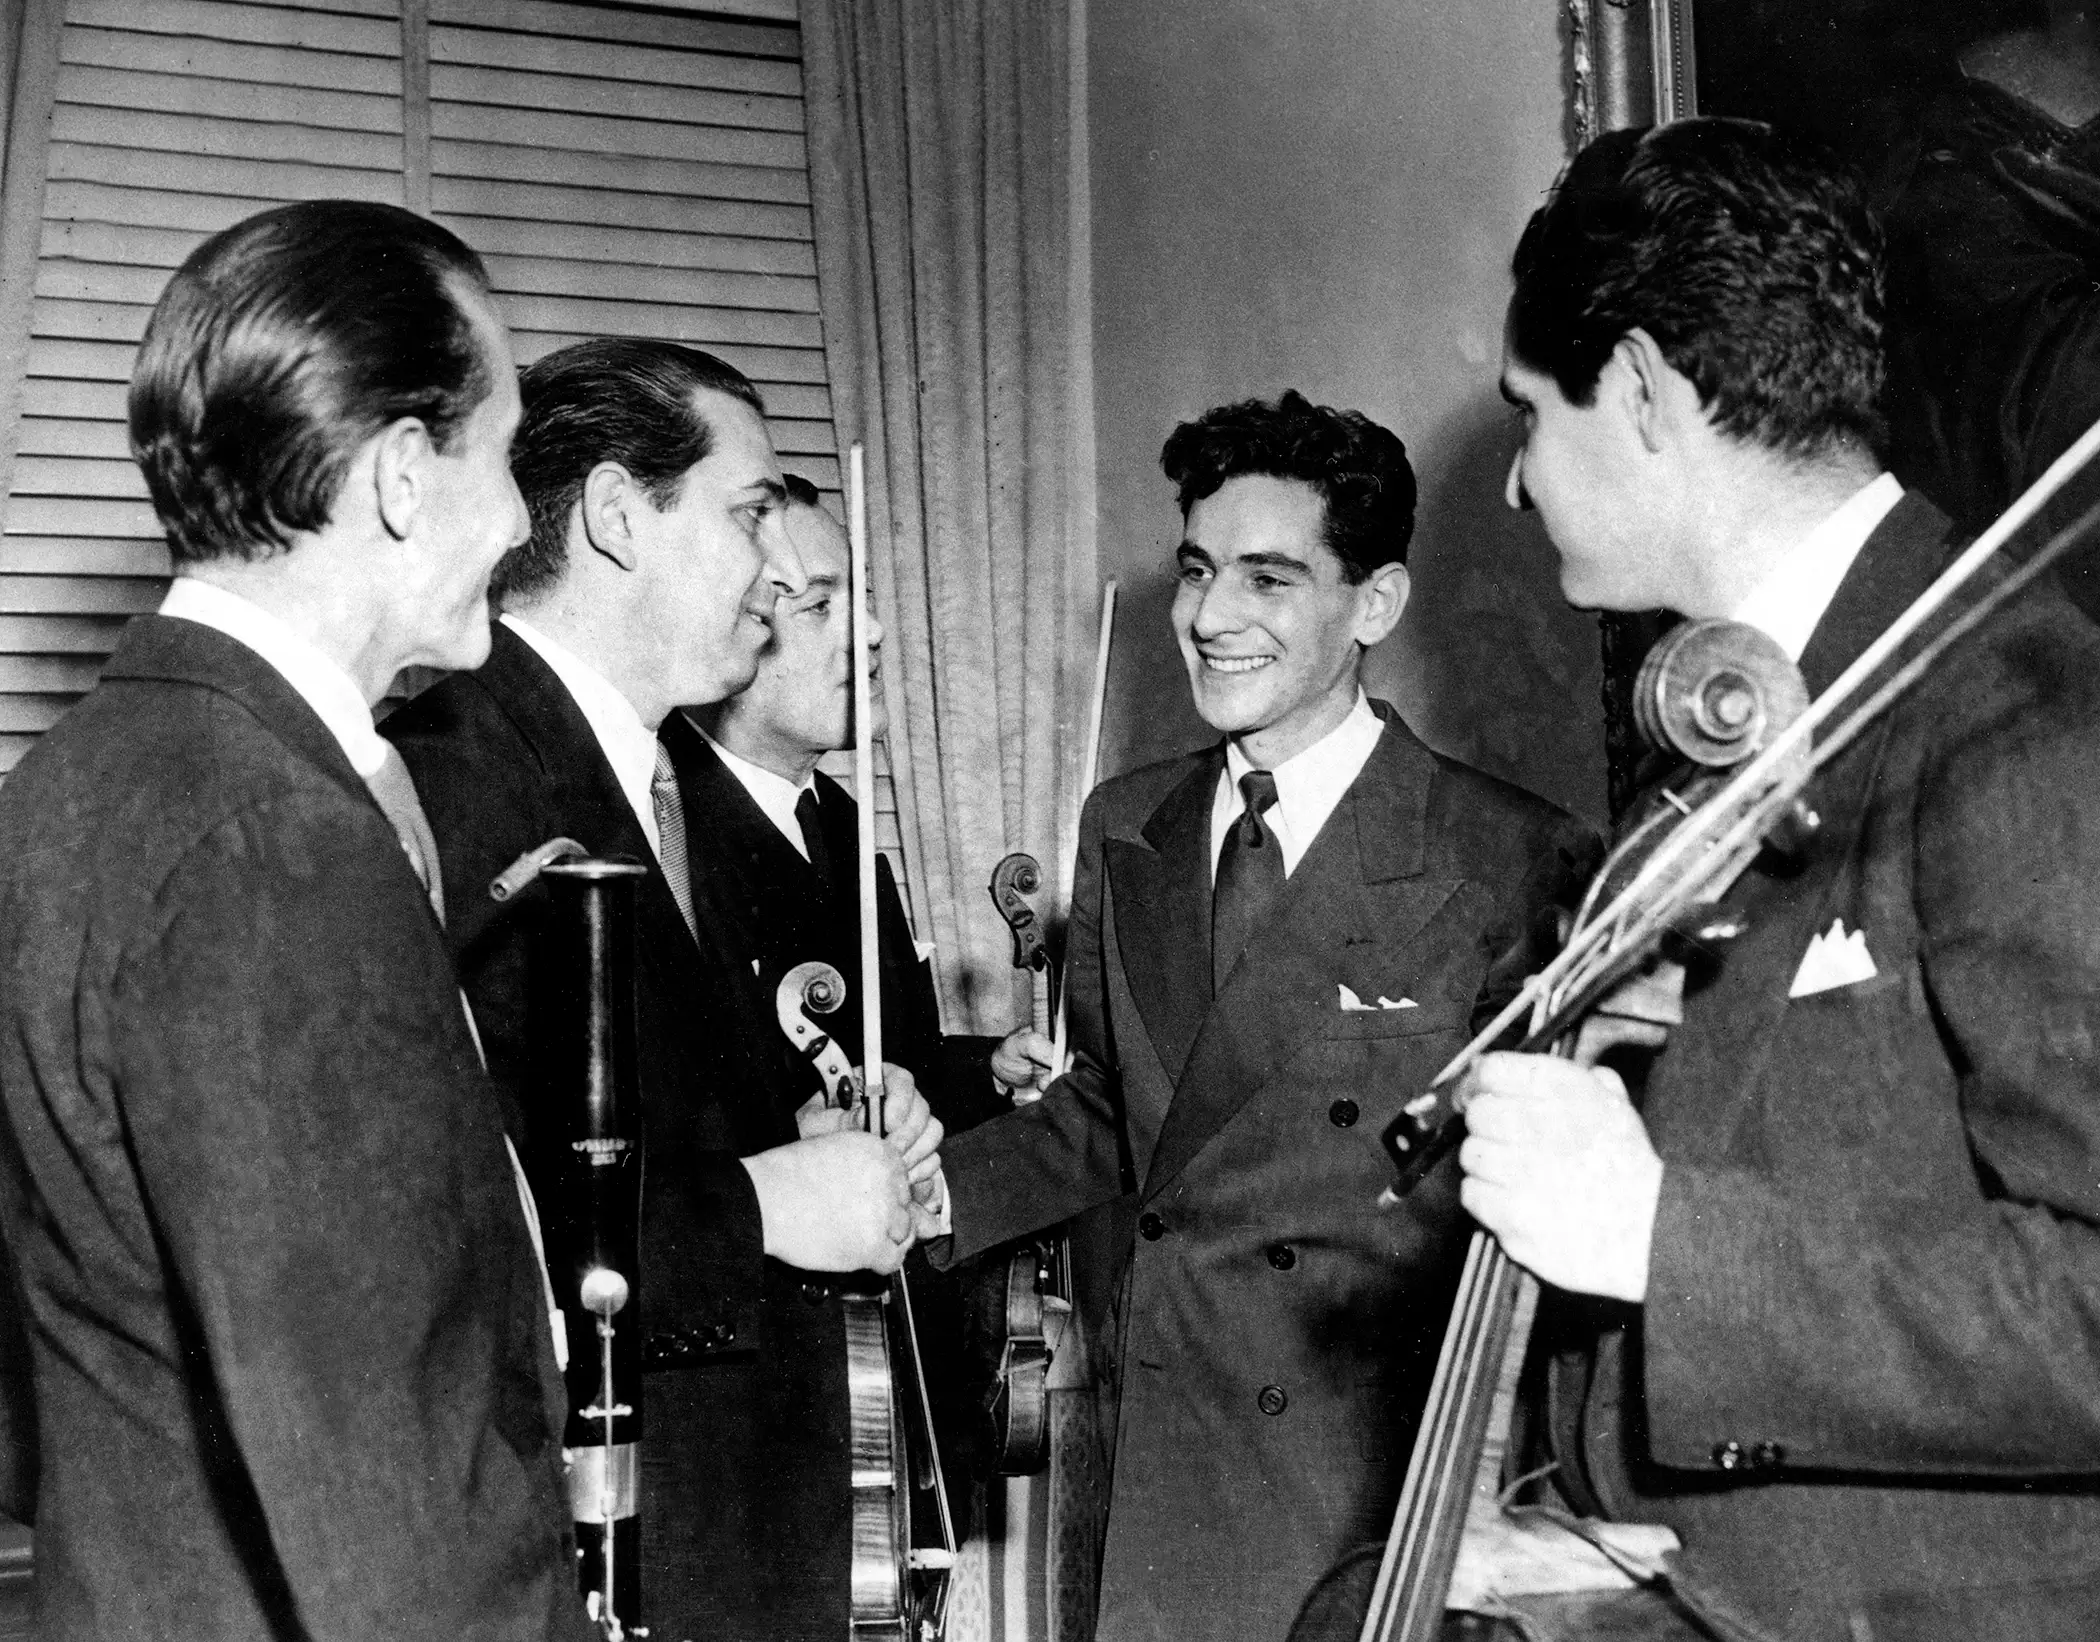 Leonard Bernstein, second from right, Assistant Conductor of the New York Philharmonic-Symphony Orchestra, is congratulated by members of the orchestra after the 25-year-old musician made his debut at Carnegie Hall in New York, Nov. 14, 1943. Bernstein substituted for Bruno Walter, who had become ill, to lead the organization in a 90-minute national radio broadcast.